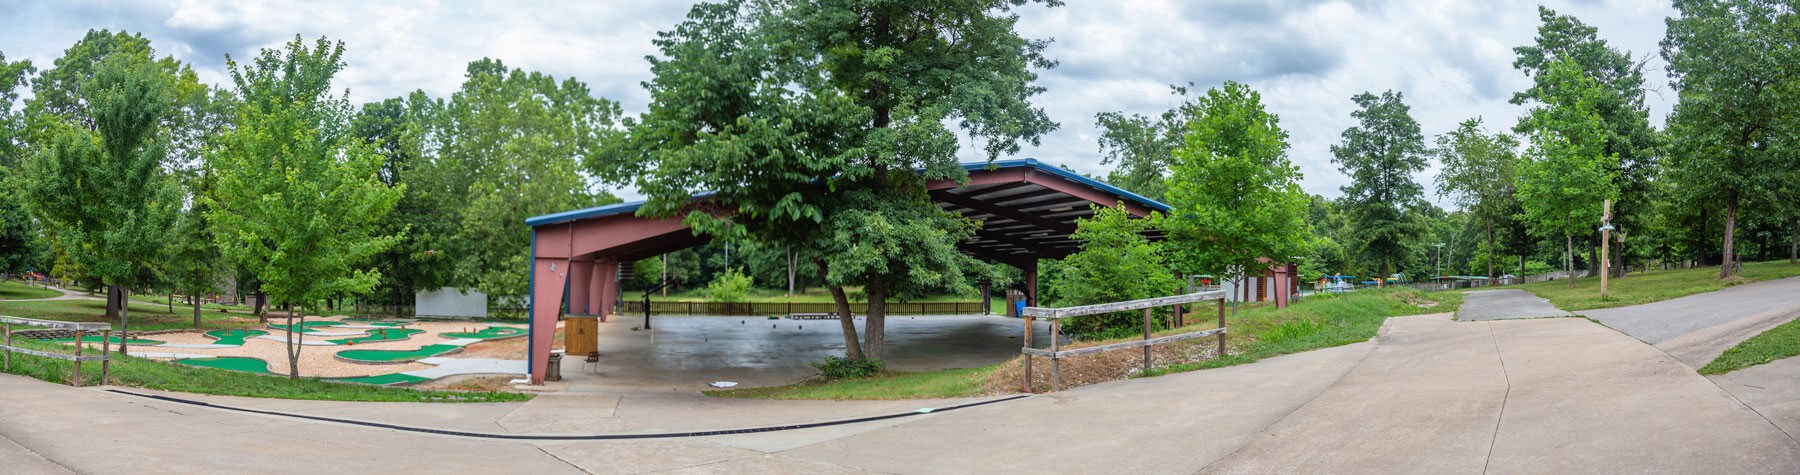 camp barnabas pavilion wide view